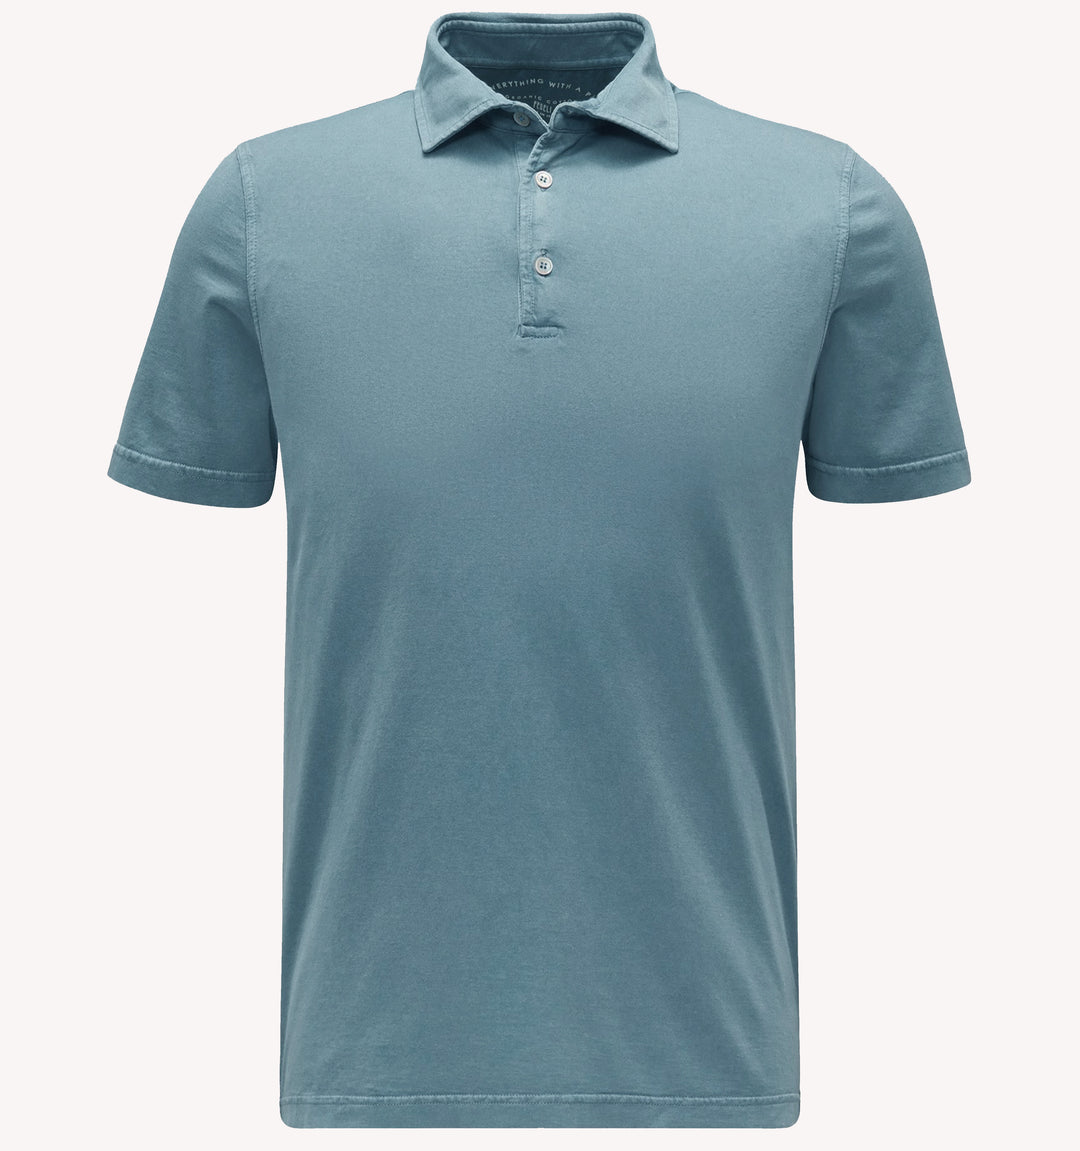 Fedeli Zero Polo in Muted Teal